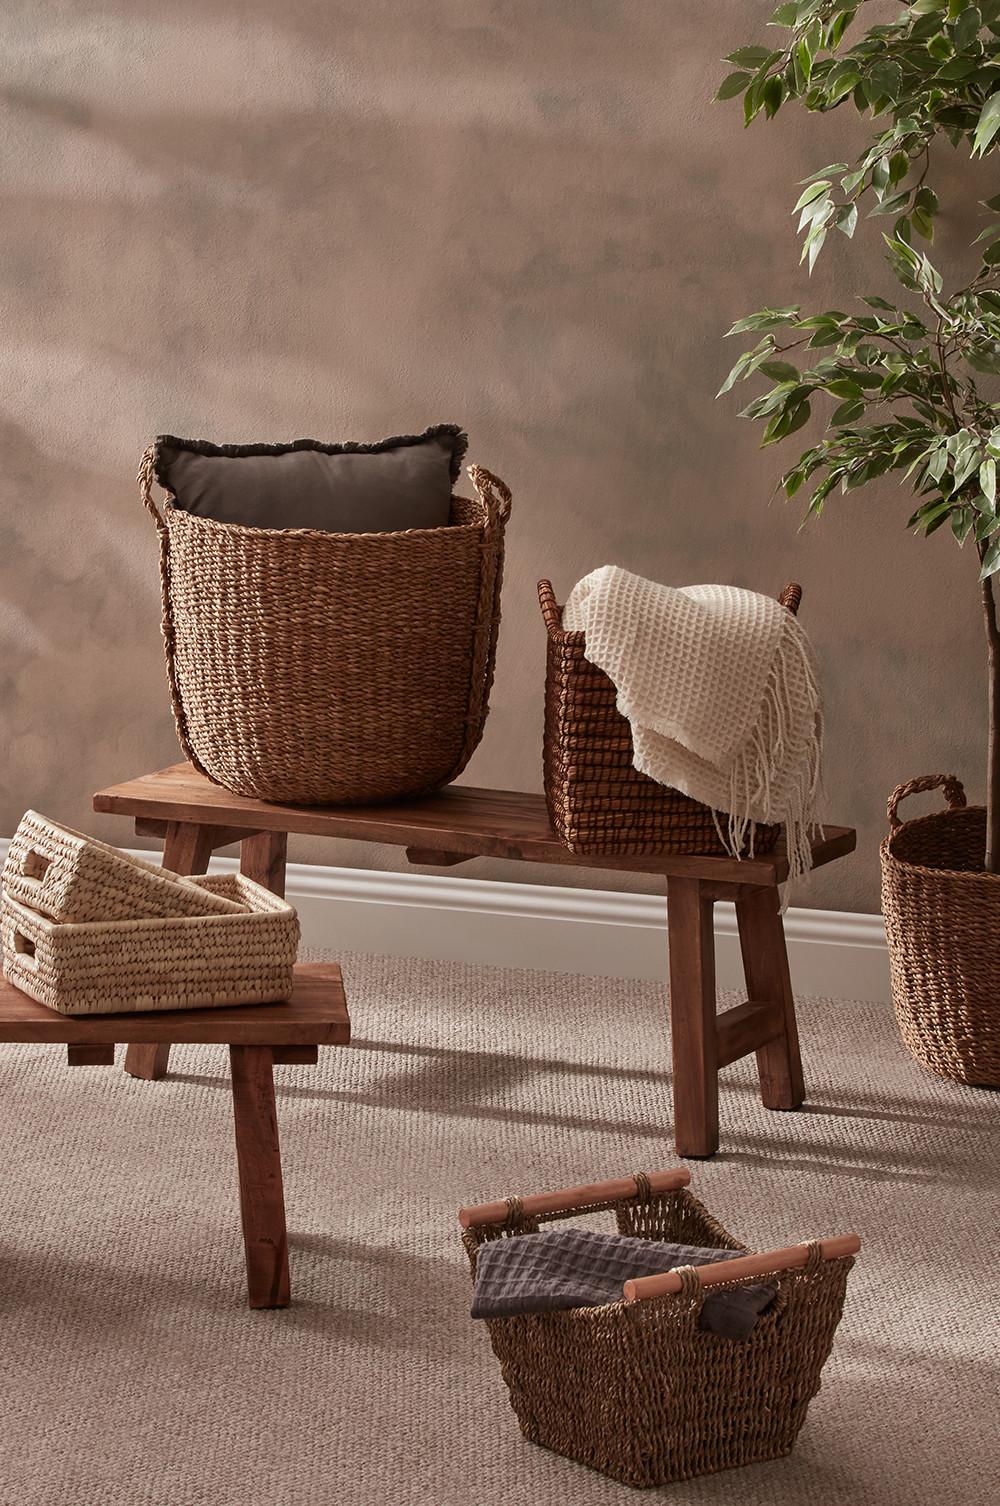 Storage baskets and blankets sit on wooden benches